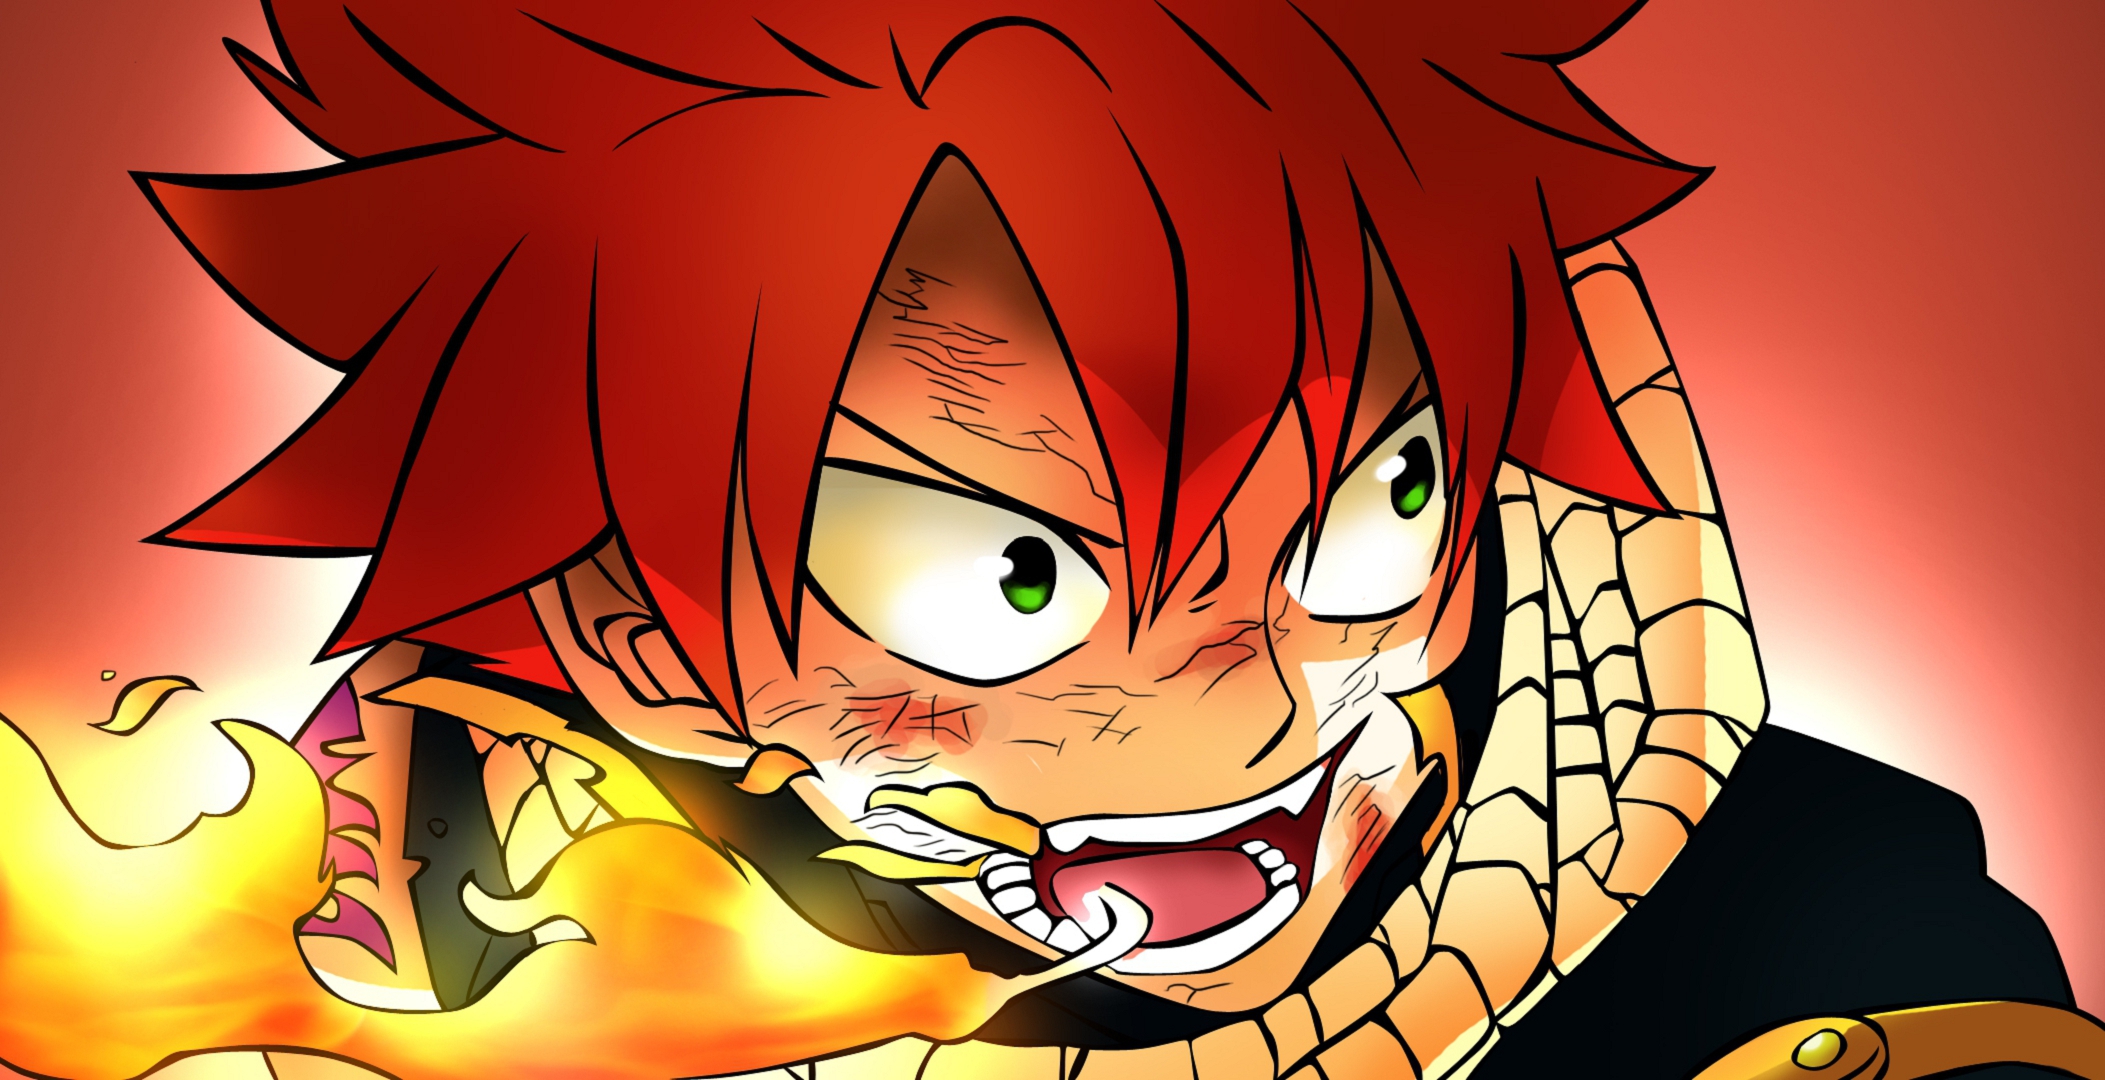 2. Natsu Dragneel from Fairy Tail - wide 7